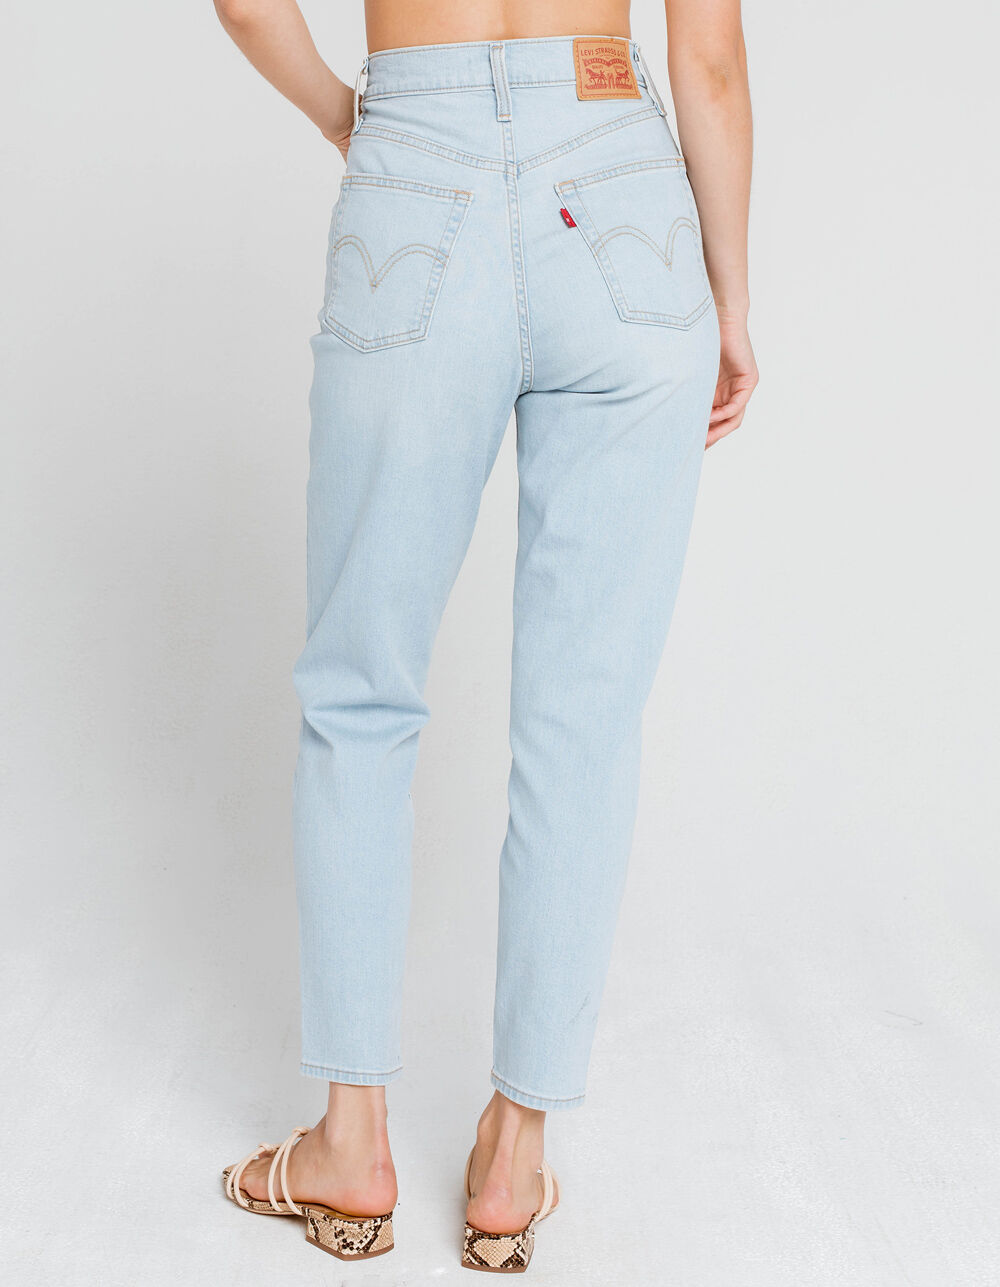 LEVI'S Womens High Waisted Taper Jeans - LIGHT WASH | Tillys